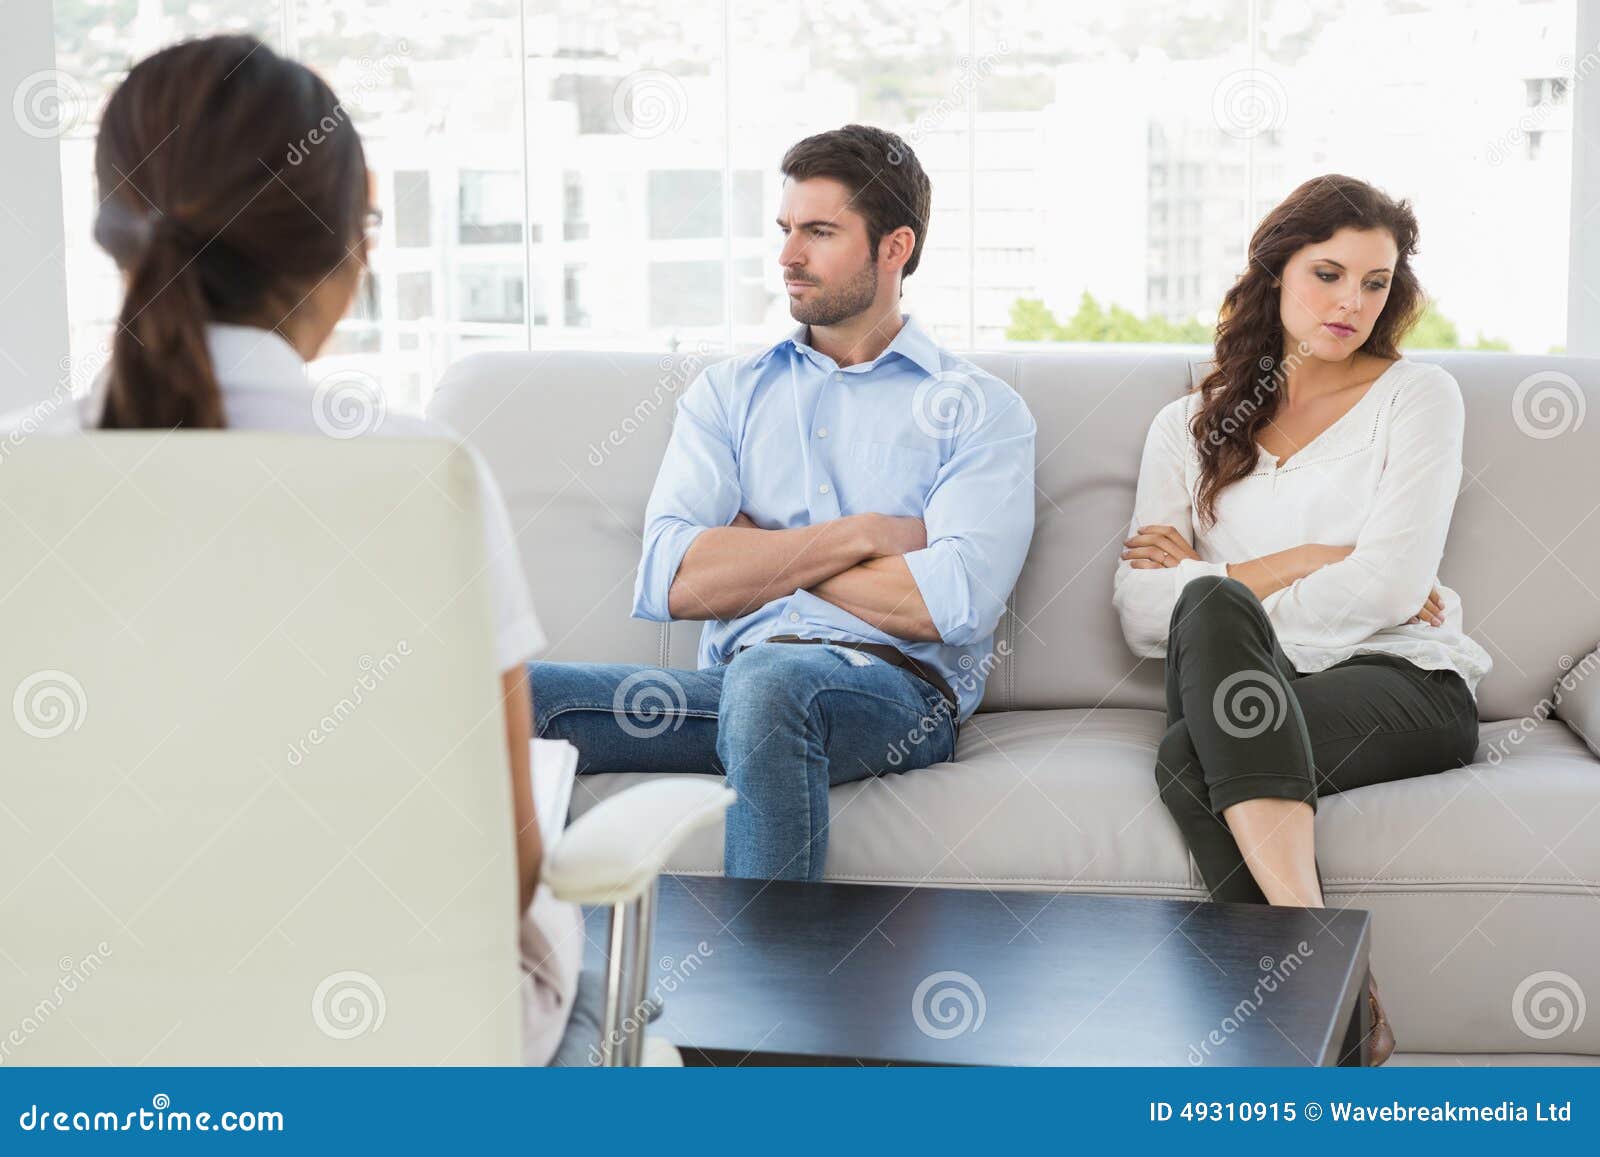 psychologist helping a couple with relationship difficulties